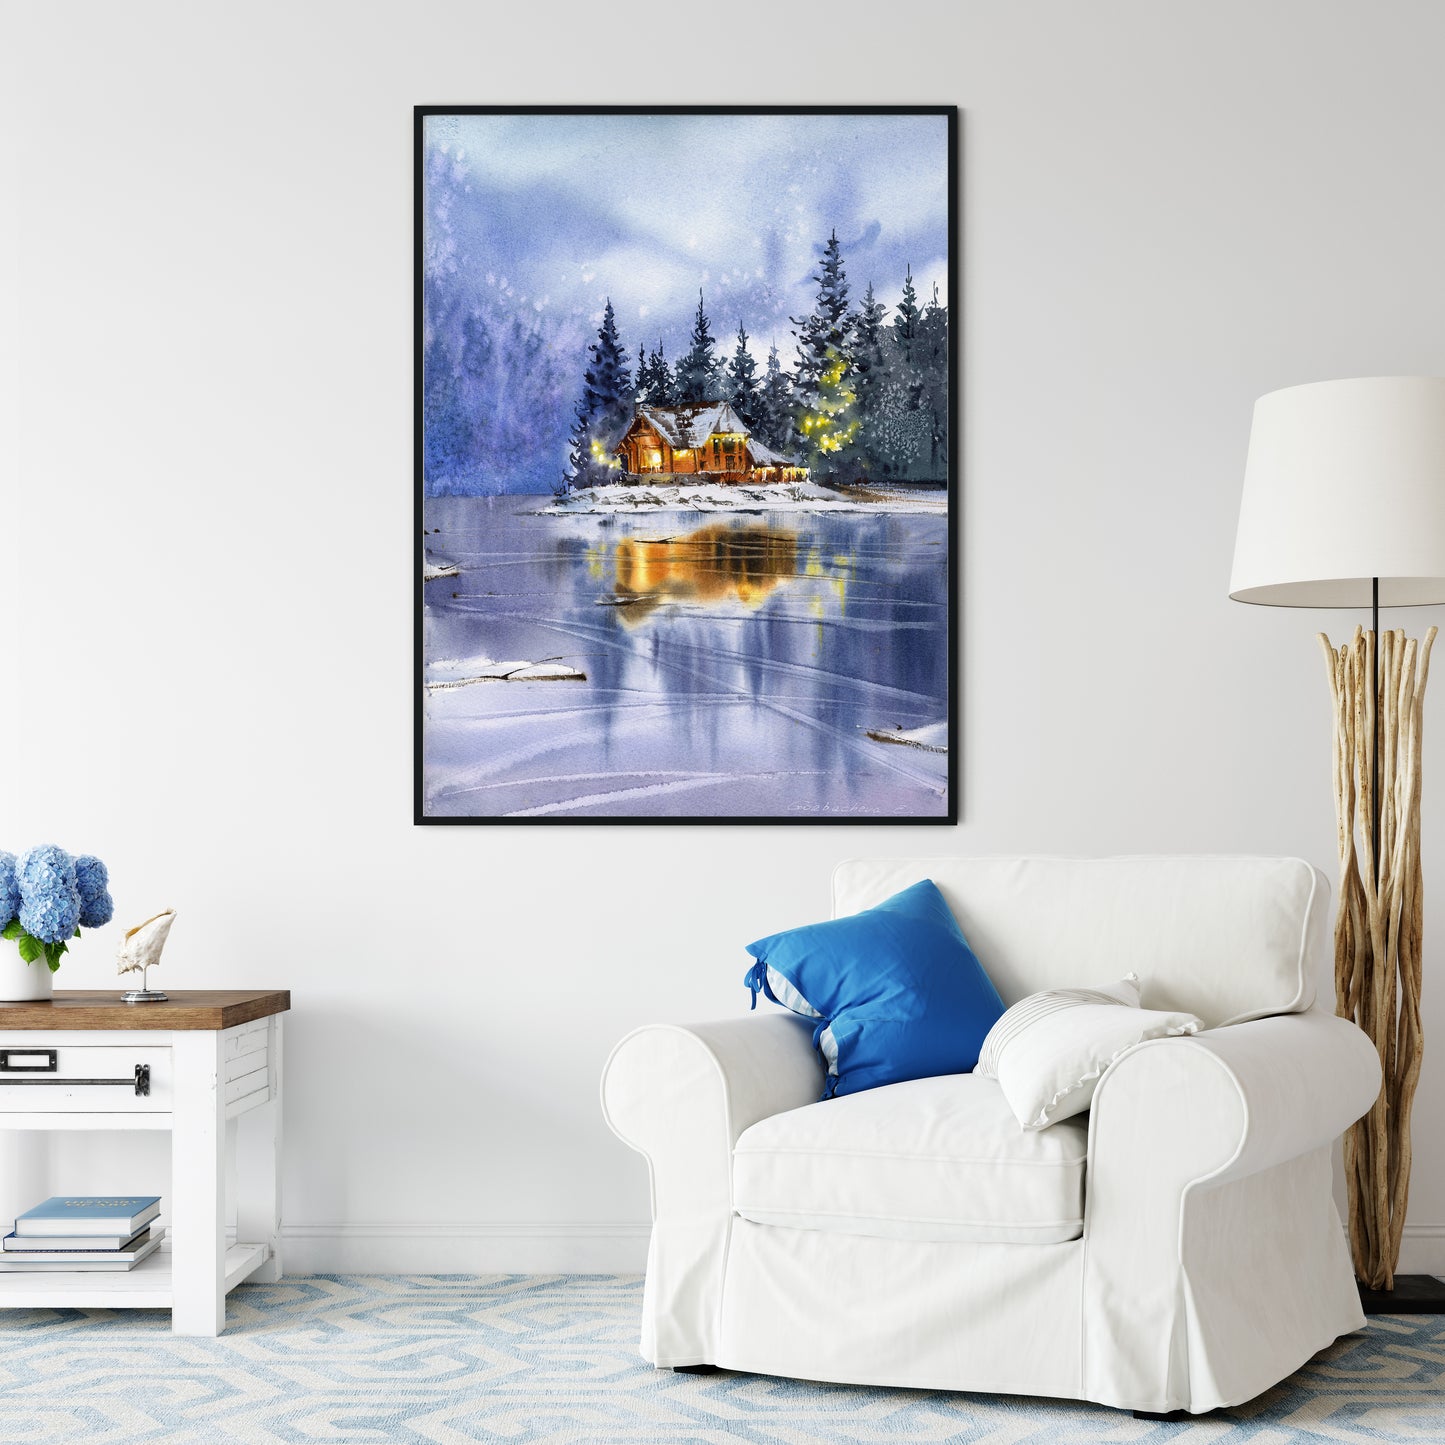 Winter Print, Watercolor Christmas Painting, Holiday Wall Art, Lake House Decor, Snowy Landscape Artwork